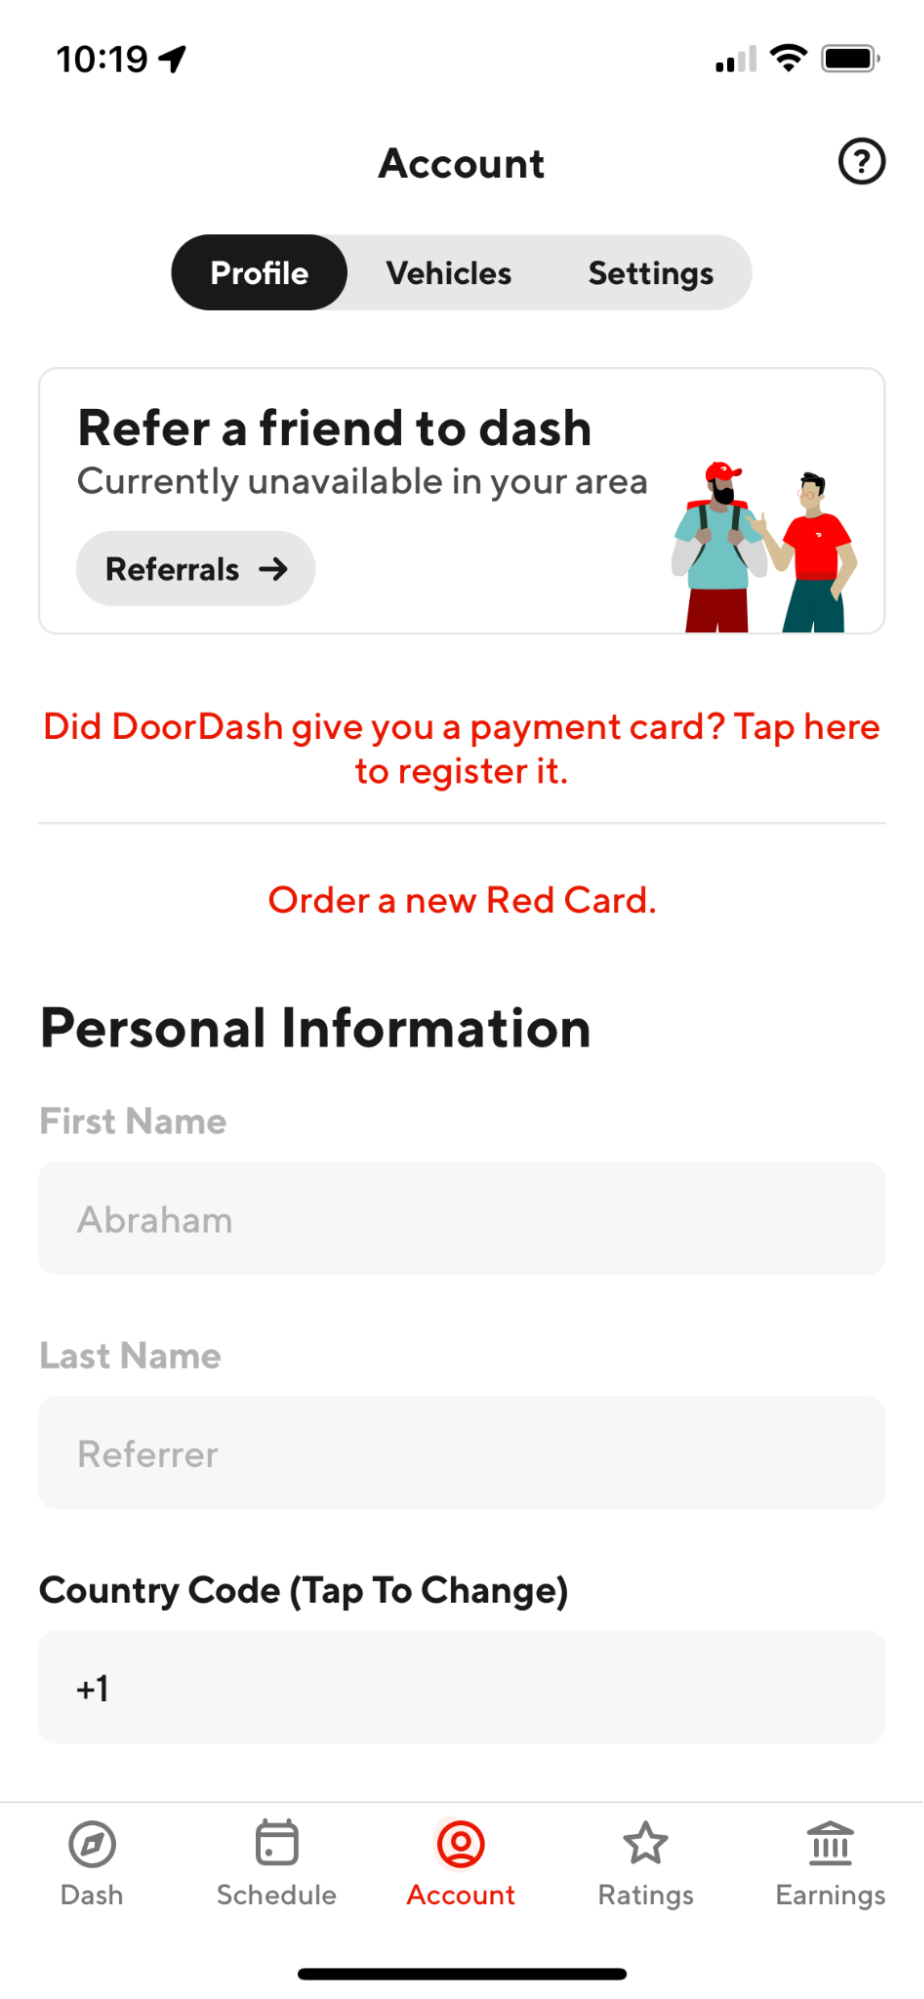 Is this website legit or part of a scam? I got a call from doordash driver  support that said the order I just taken was fraudulent and I needed me to  log